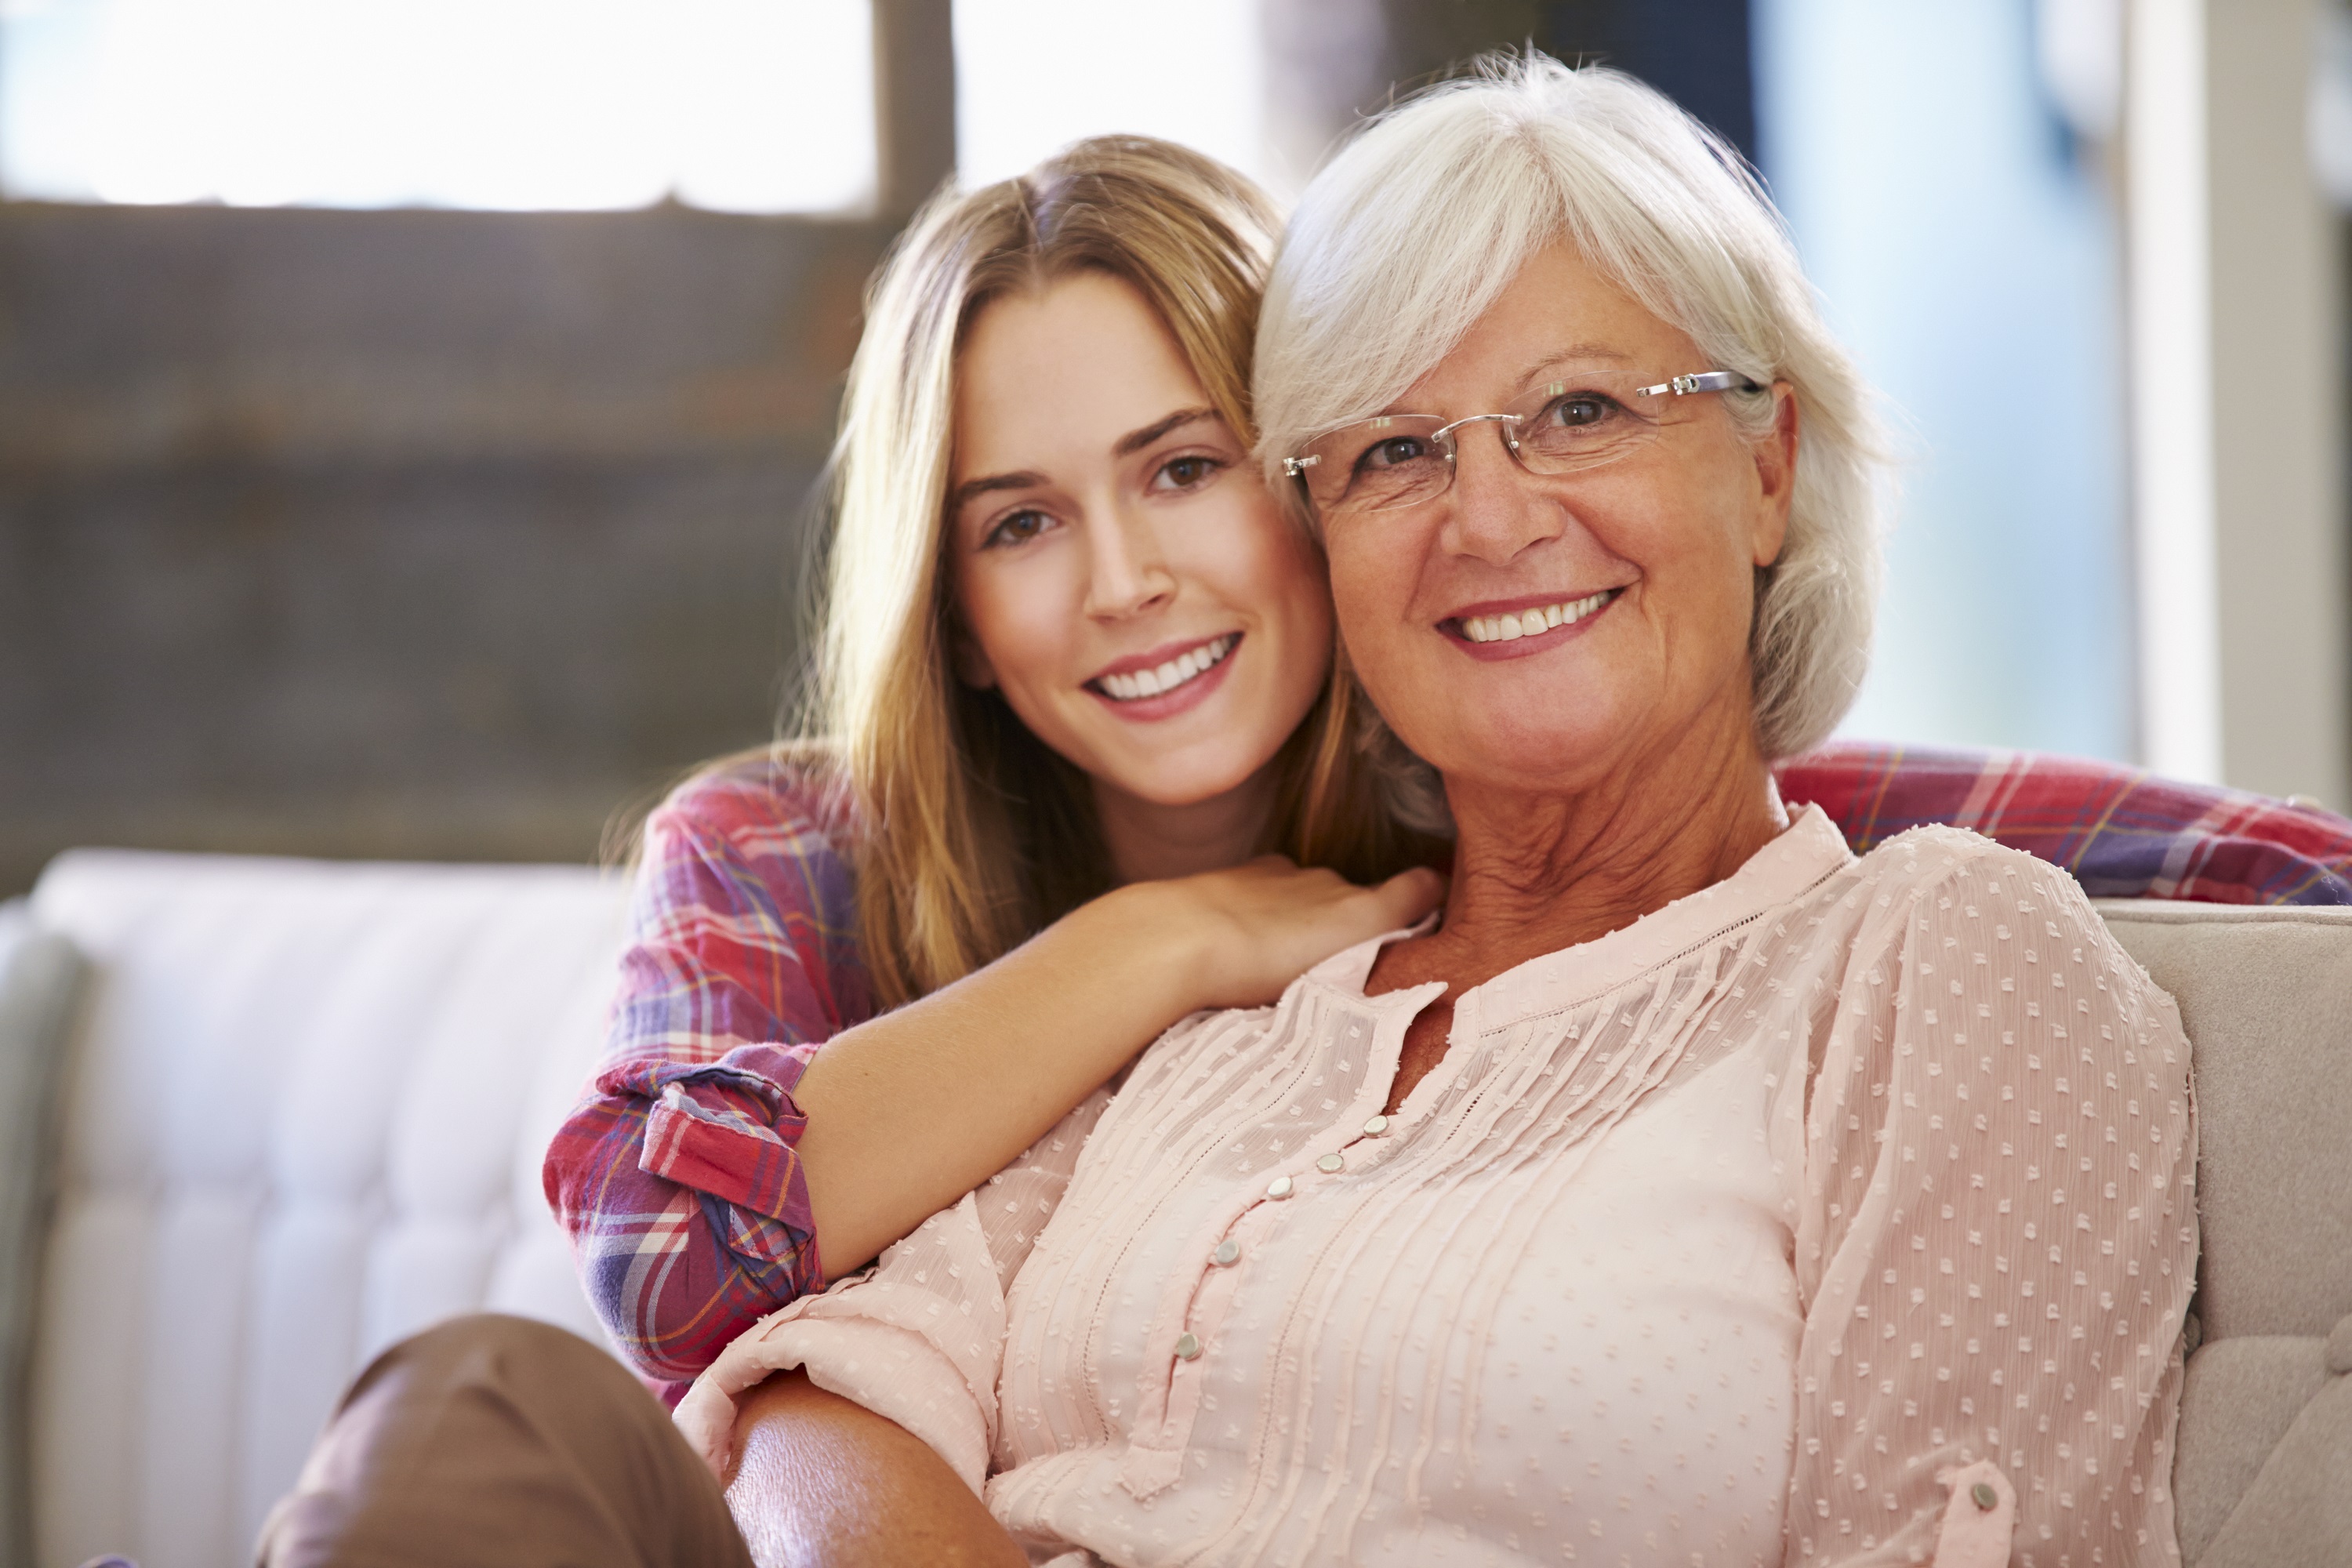 Grandmother With Adult Granddaughter Relaxing On Sofa